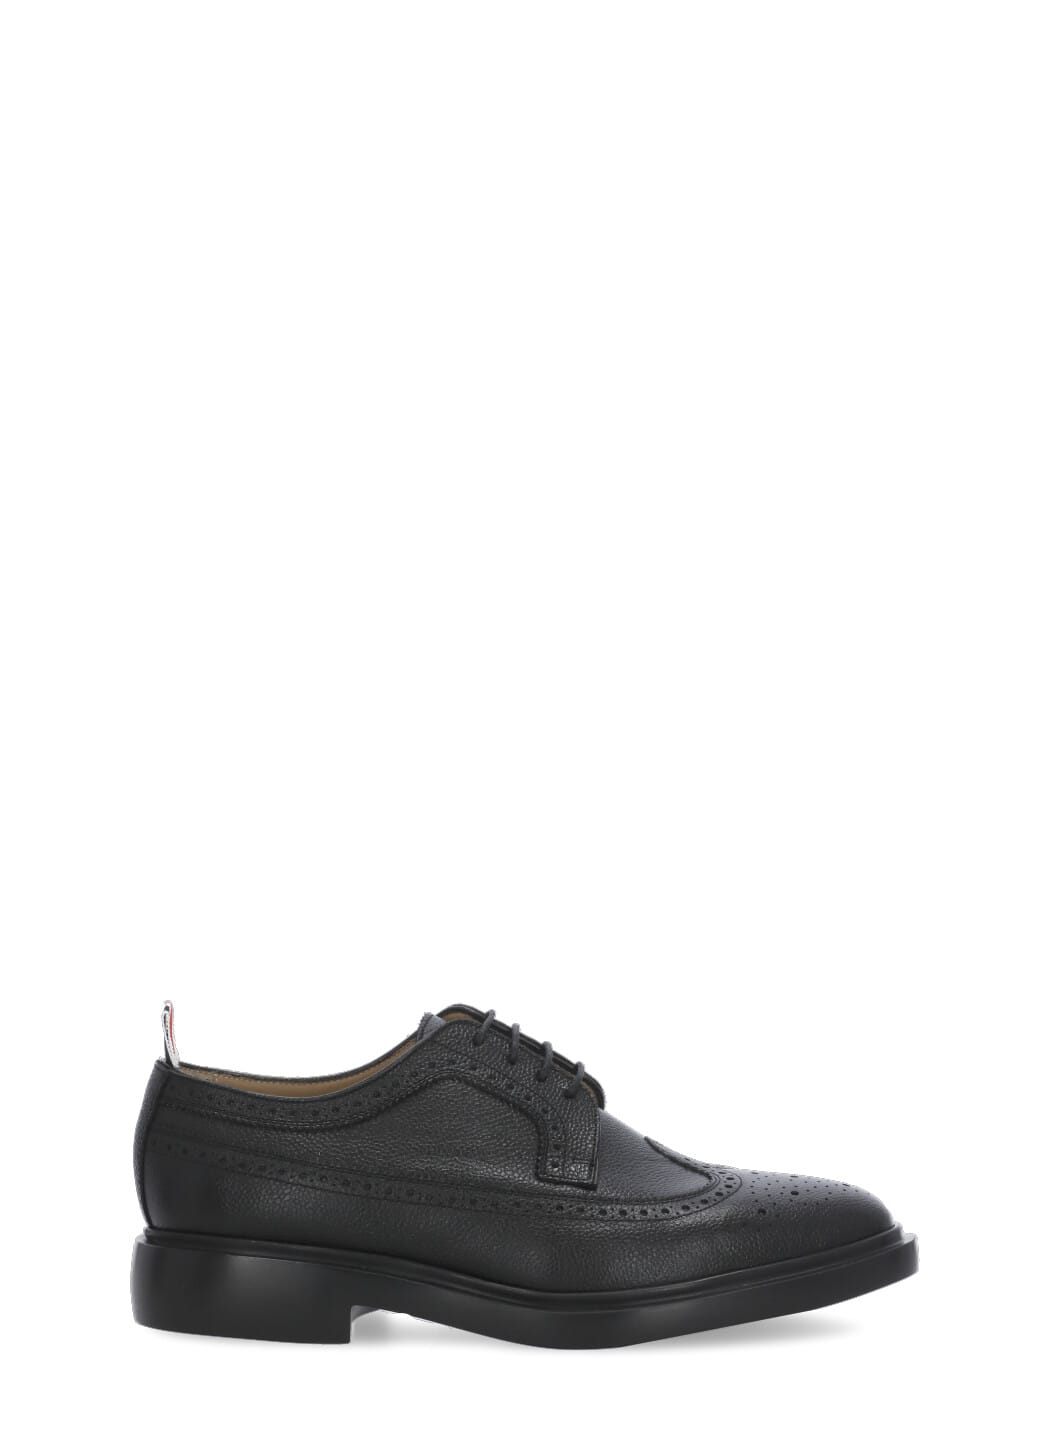 Thom Browne Leather Lace-up Shoes